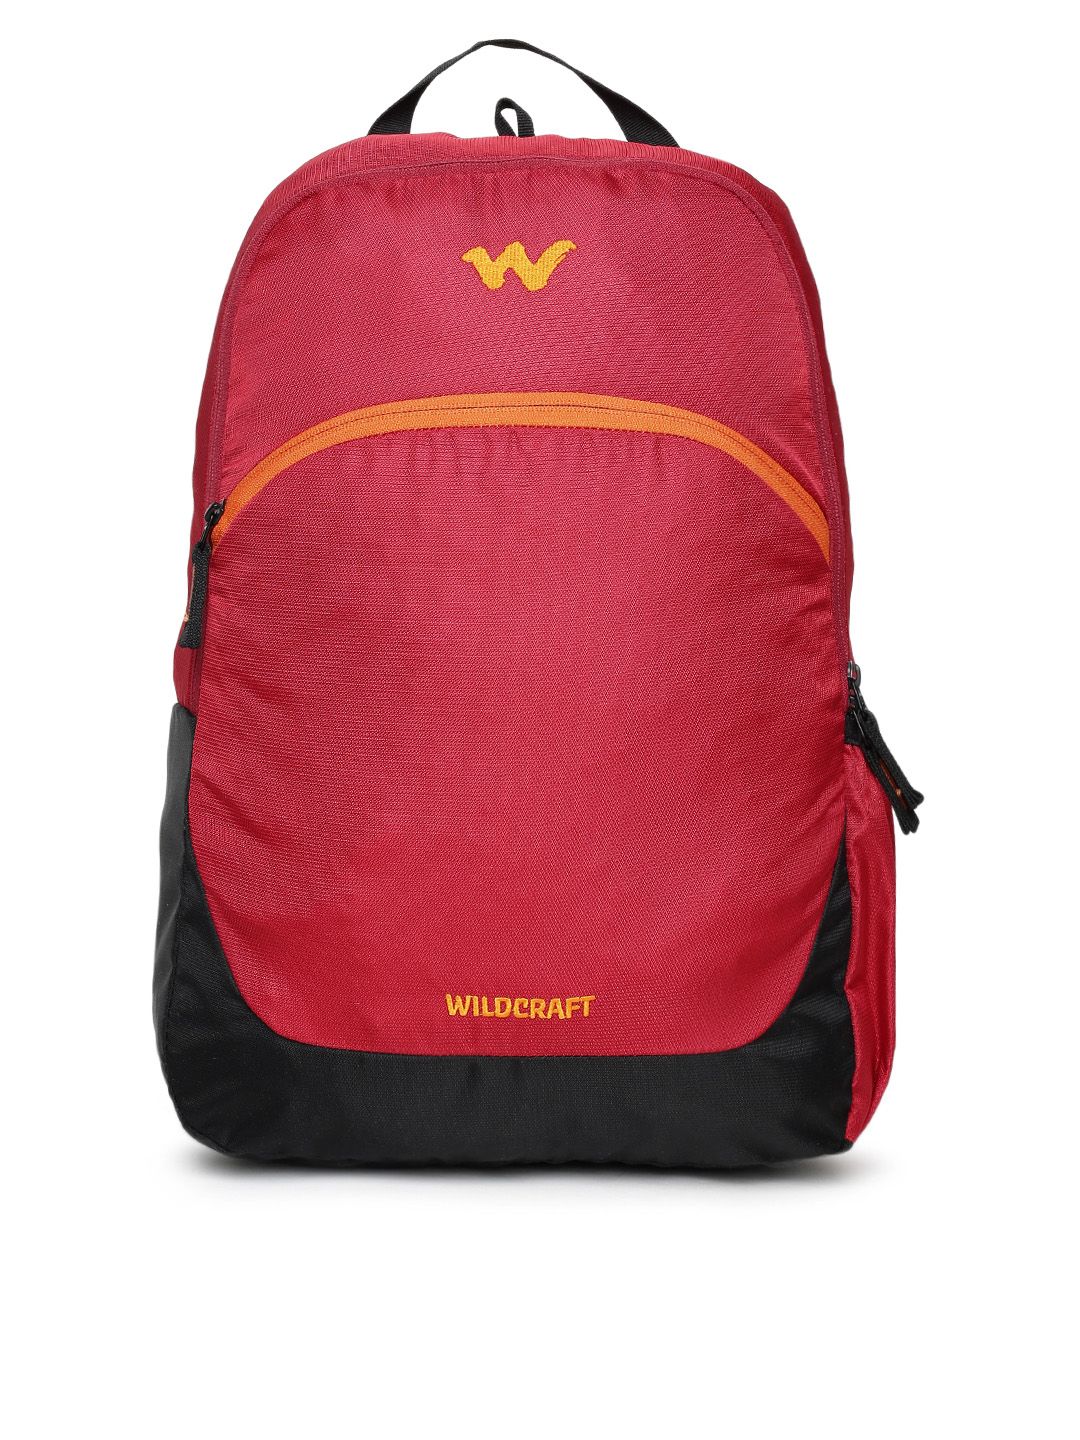 Wildcraft Unisex Red Brand Logo Backpack Price in India